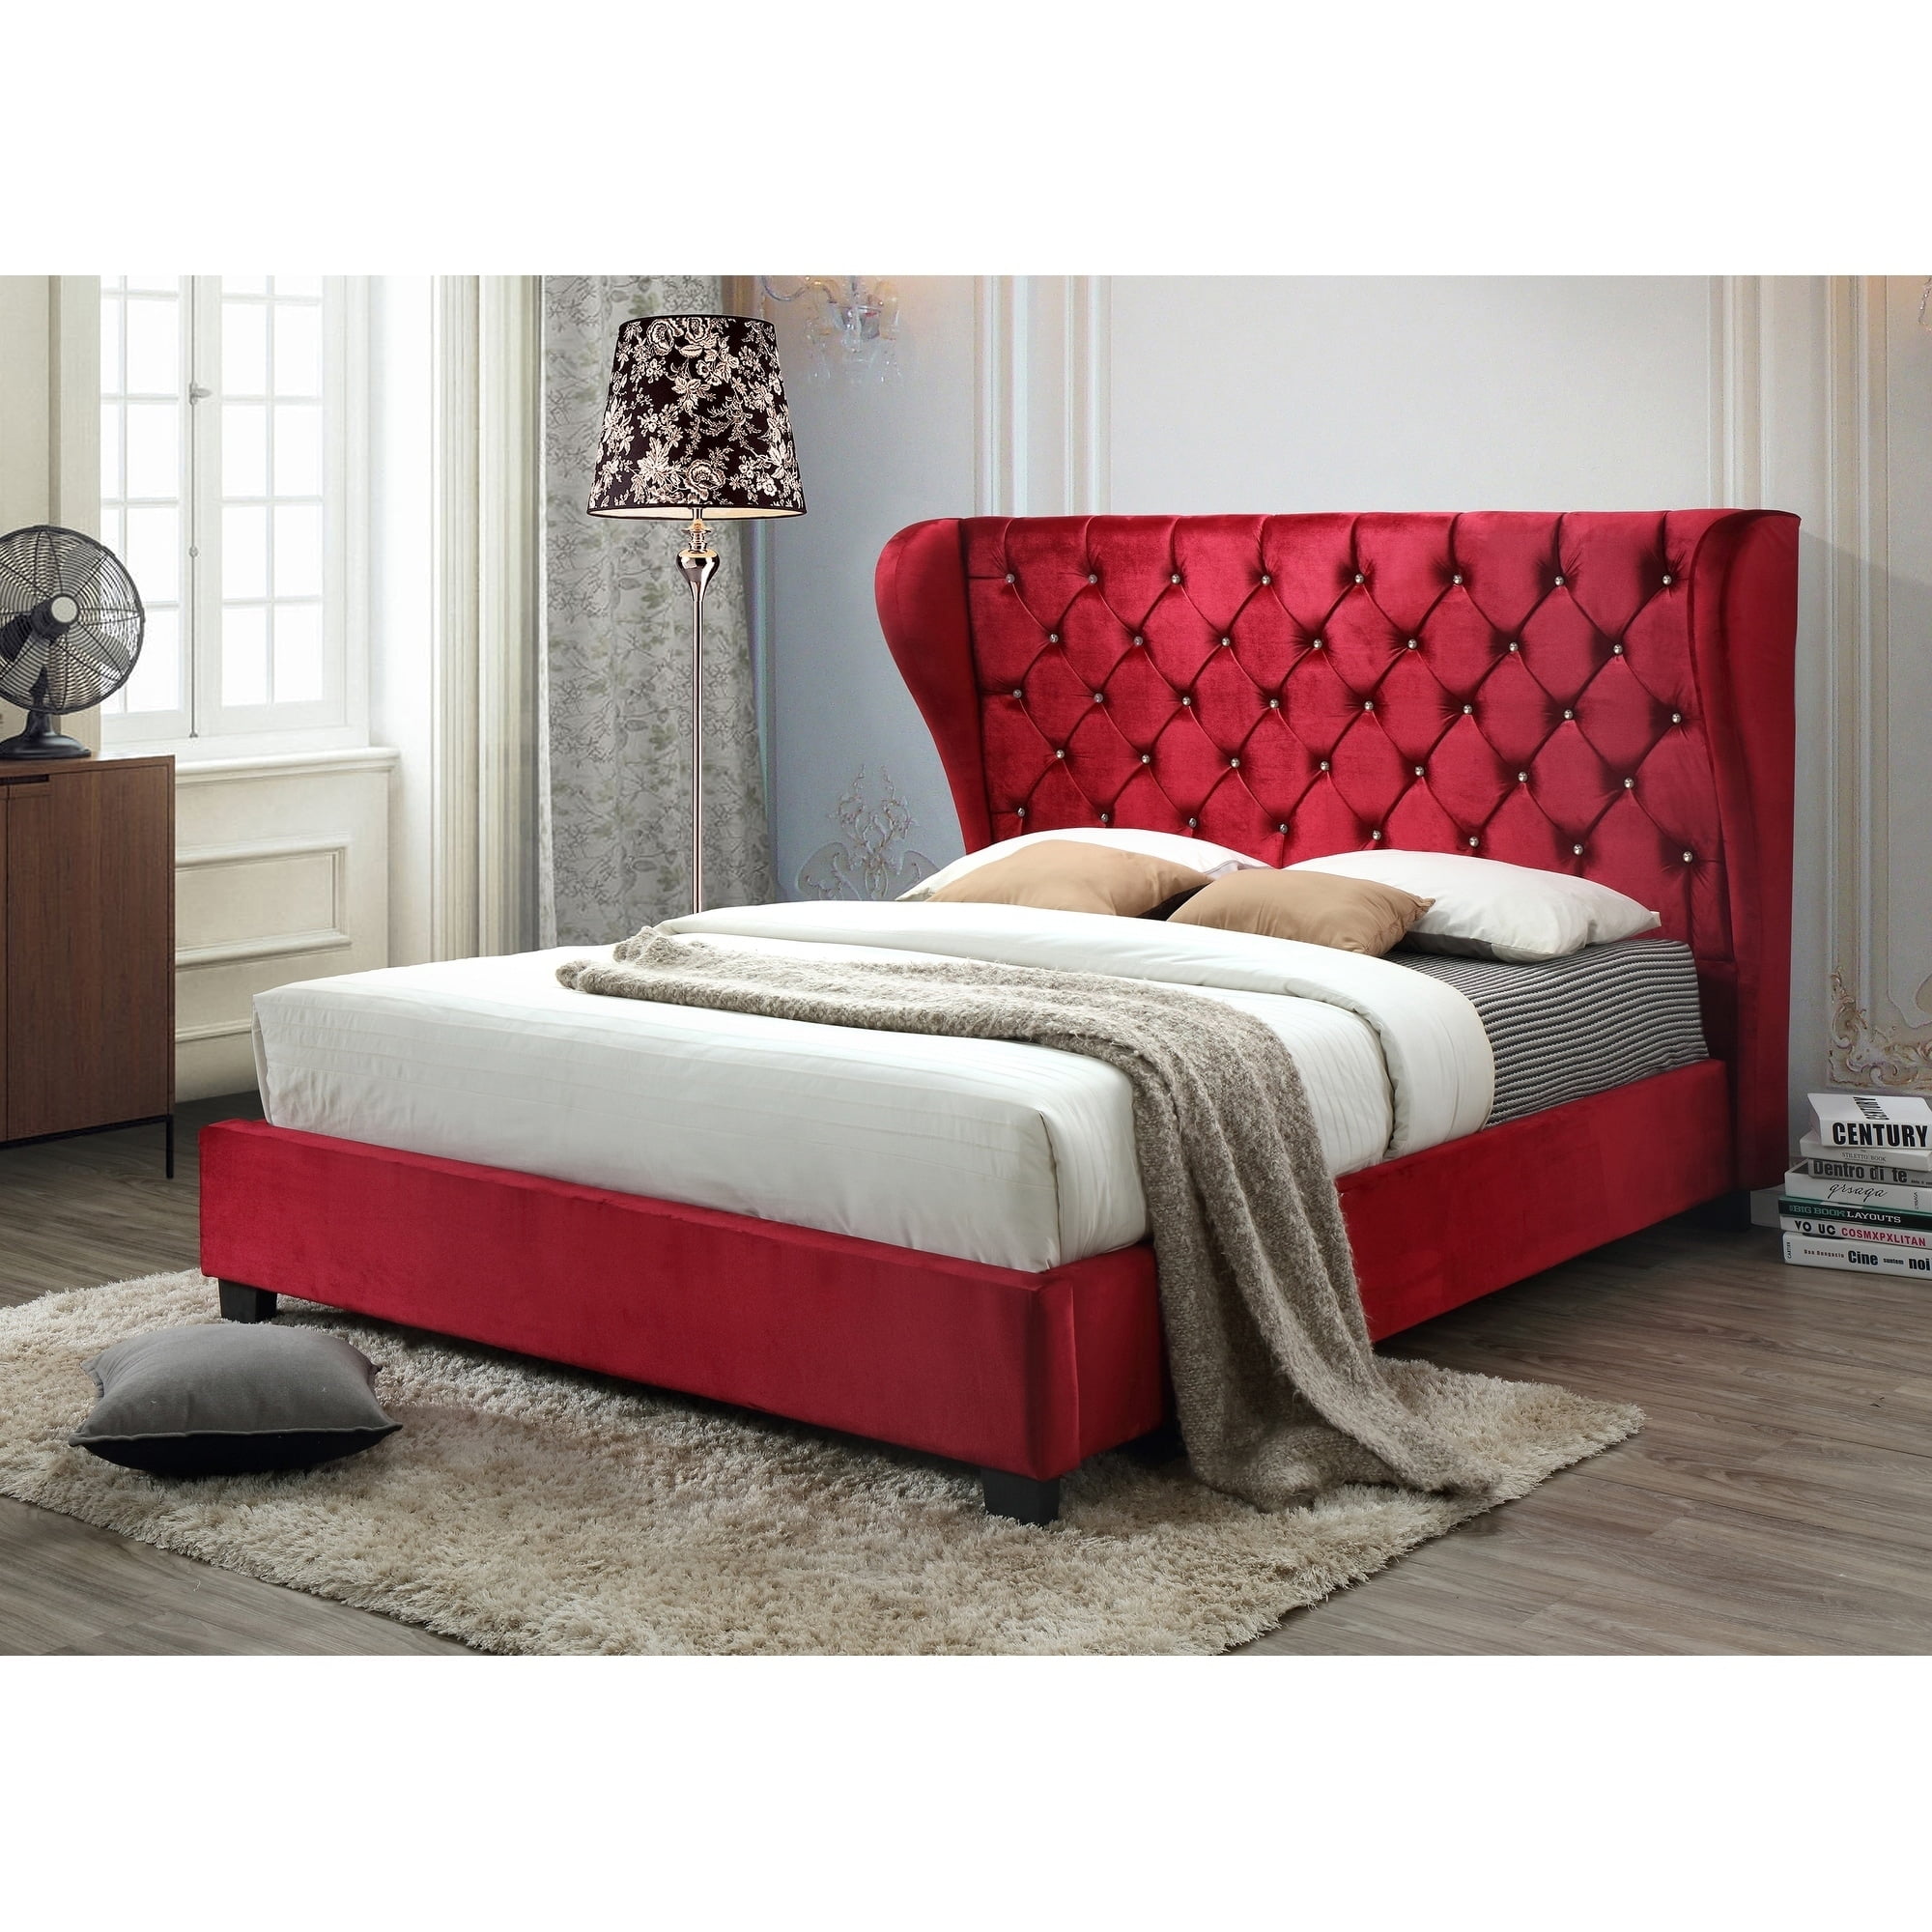 Red Tufted Classic Velvet Wingback Queen Platform Bed With A 65 In Tall Headboard No Box Spring